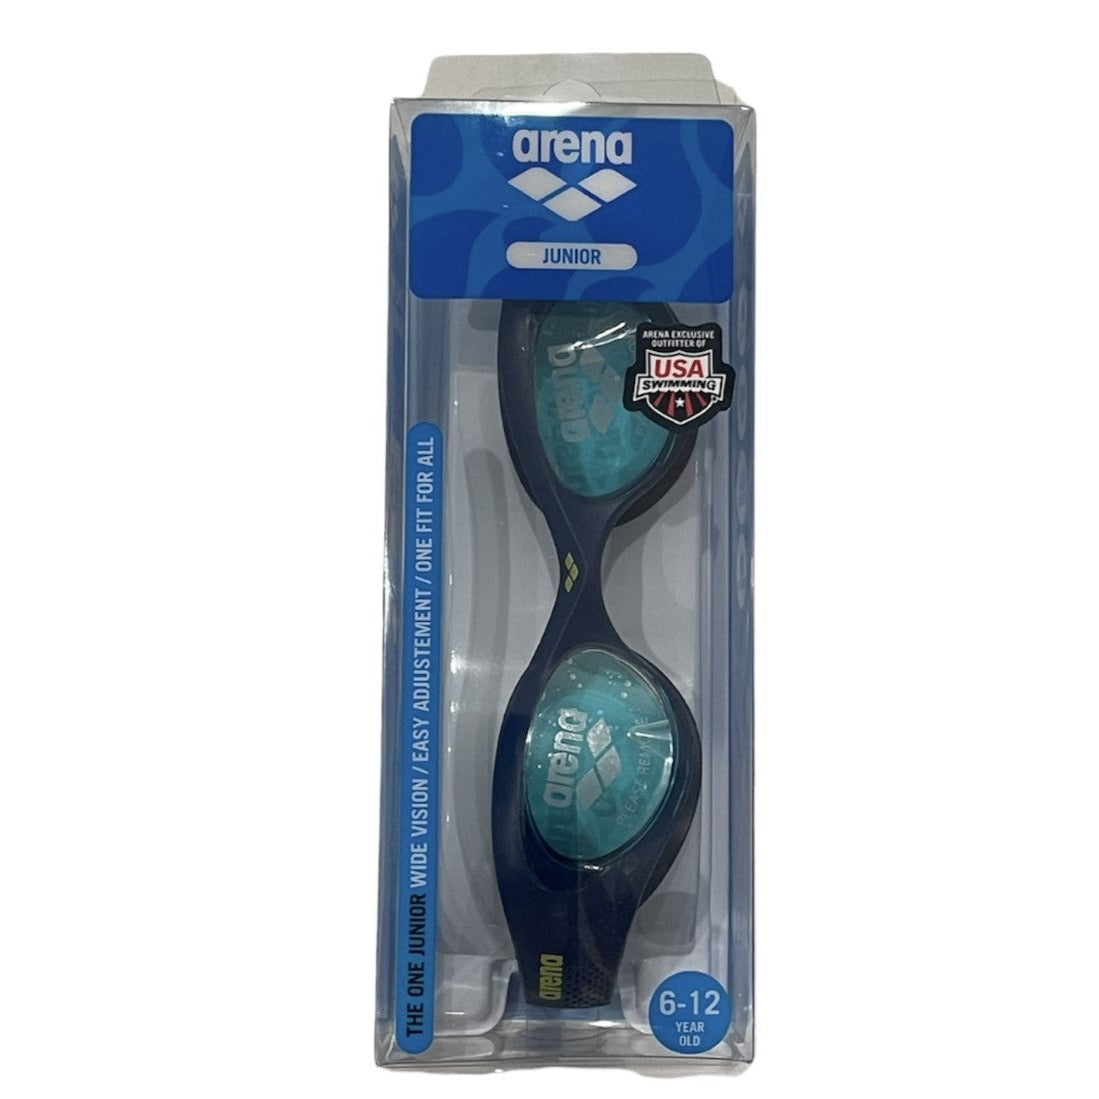 Arena The One Junior Adjustable Swimming Goggles, Blue/Light Blue. Junior Size (6-12 Years Old)